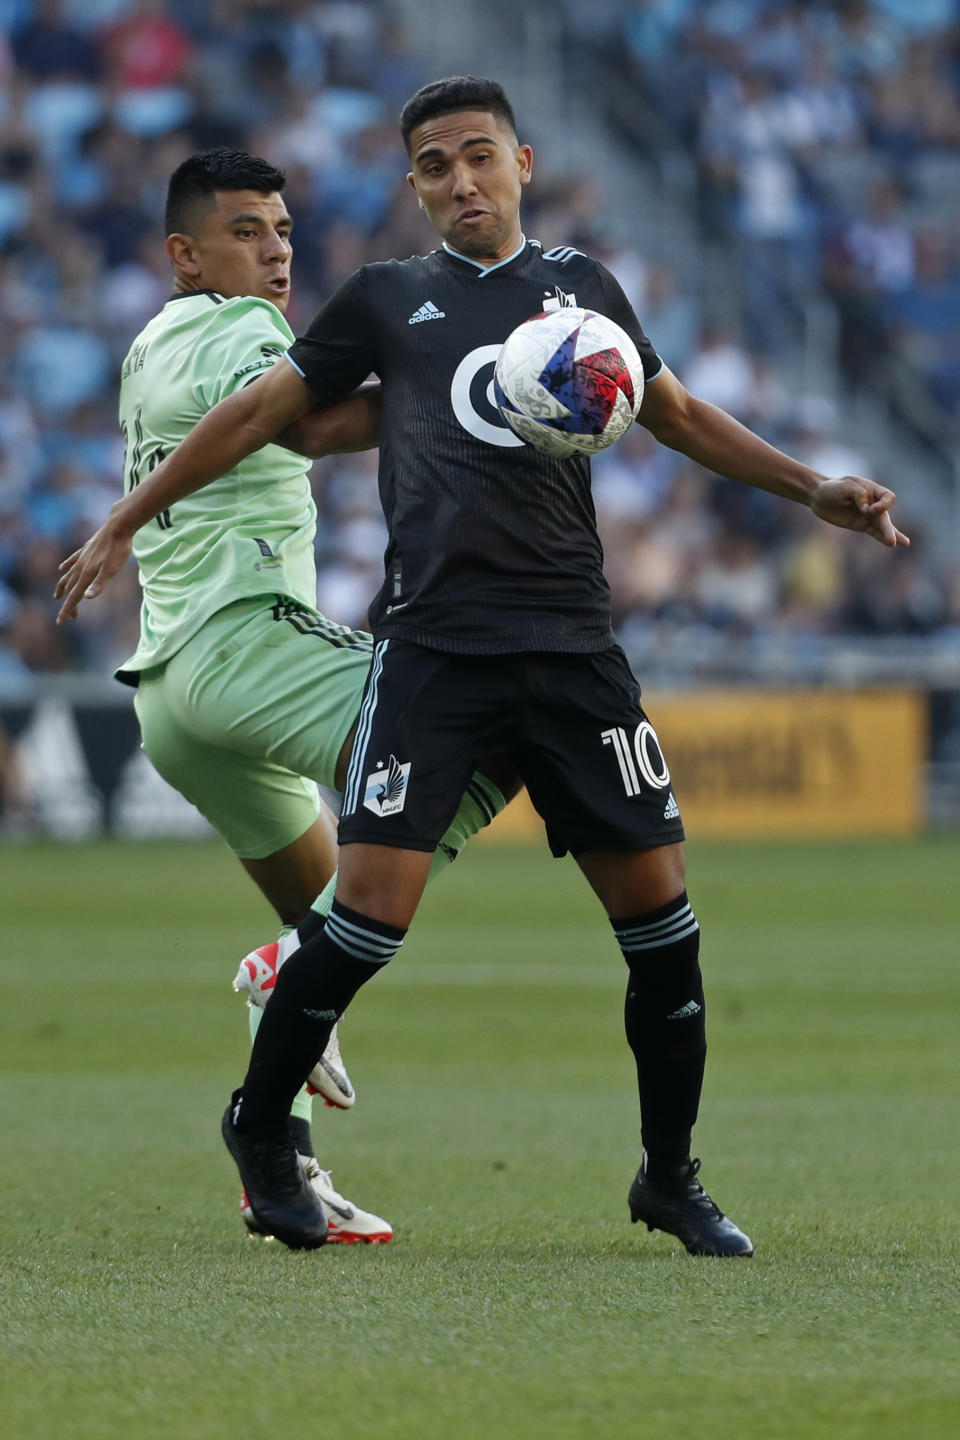 Minnesota United midfielder Emanuel Reynoso (10) traps the ball with his chest away from Austin FC defender Nick Lima, left, in the first half of an MLS soccer game Saturday, July 8, 2023, in St. Paul, Minn. (AP Photo/Bruce Kluckhohn)